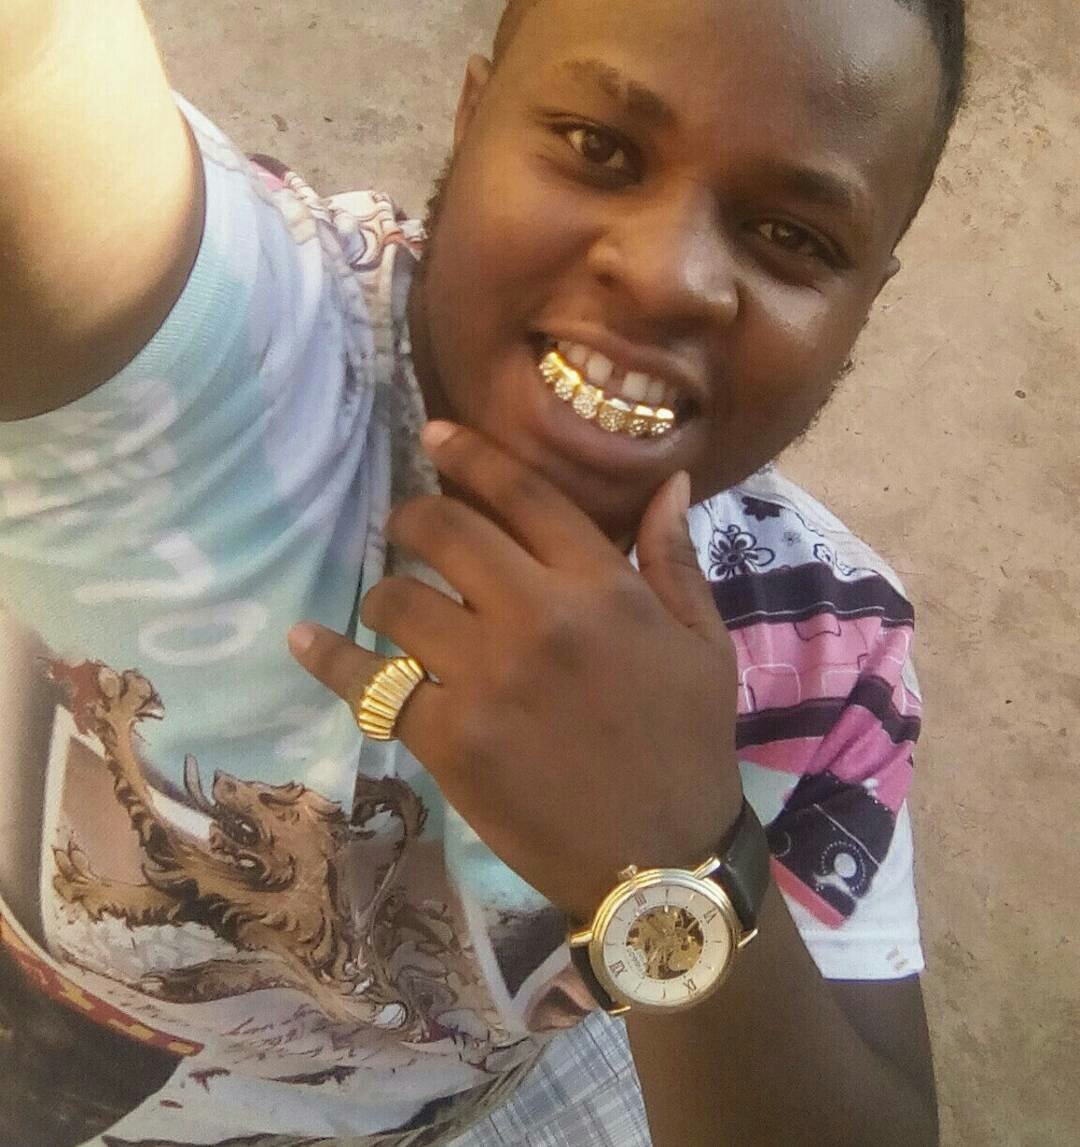 DK Kwenye Beat gets a new accent to match his 100k gold teeth